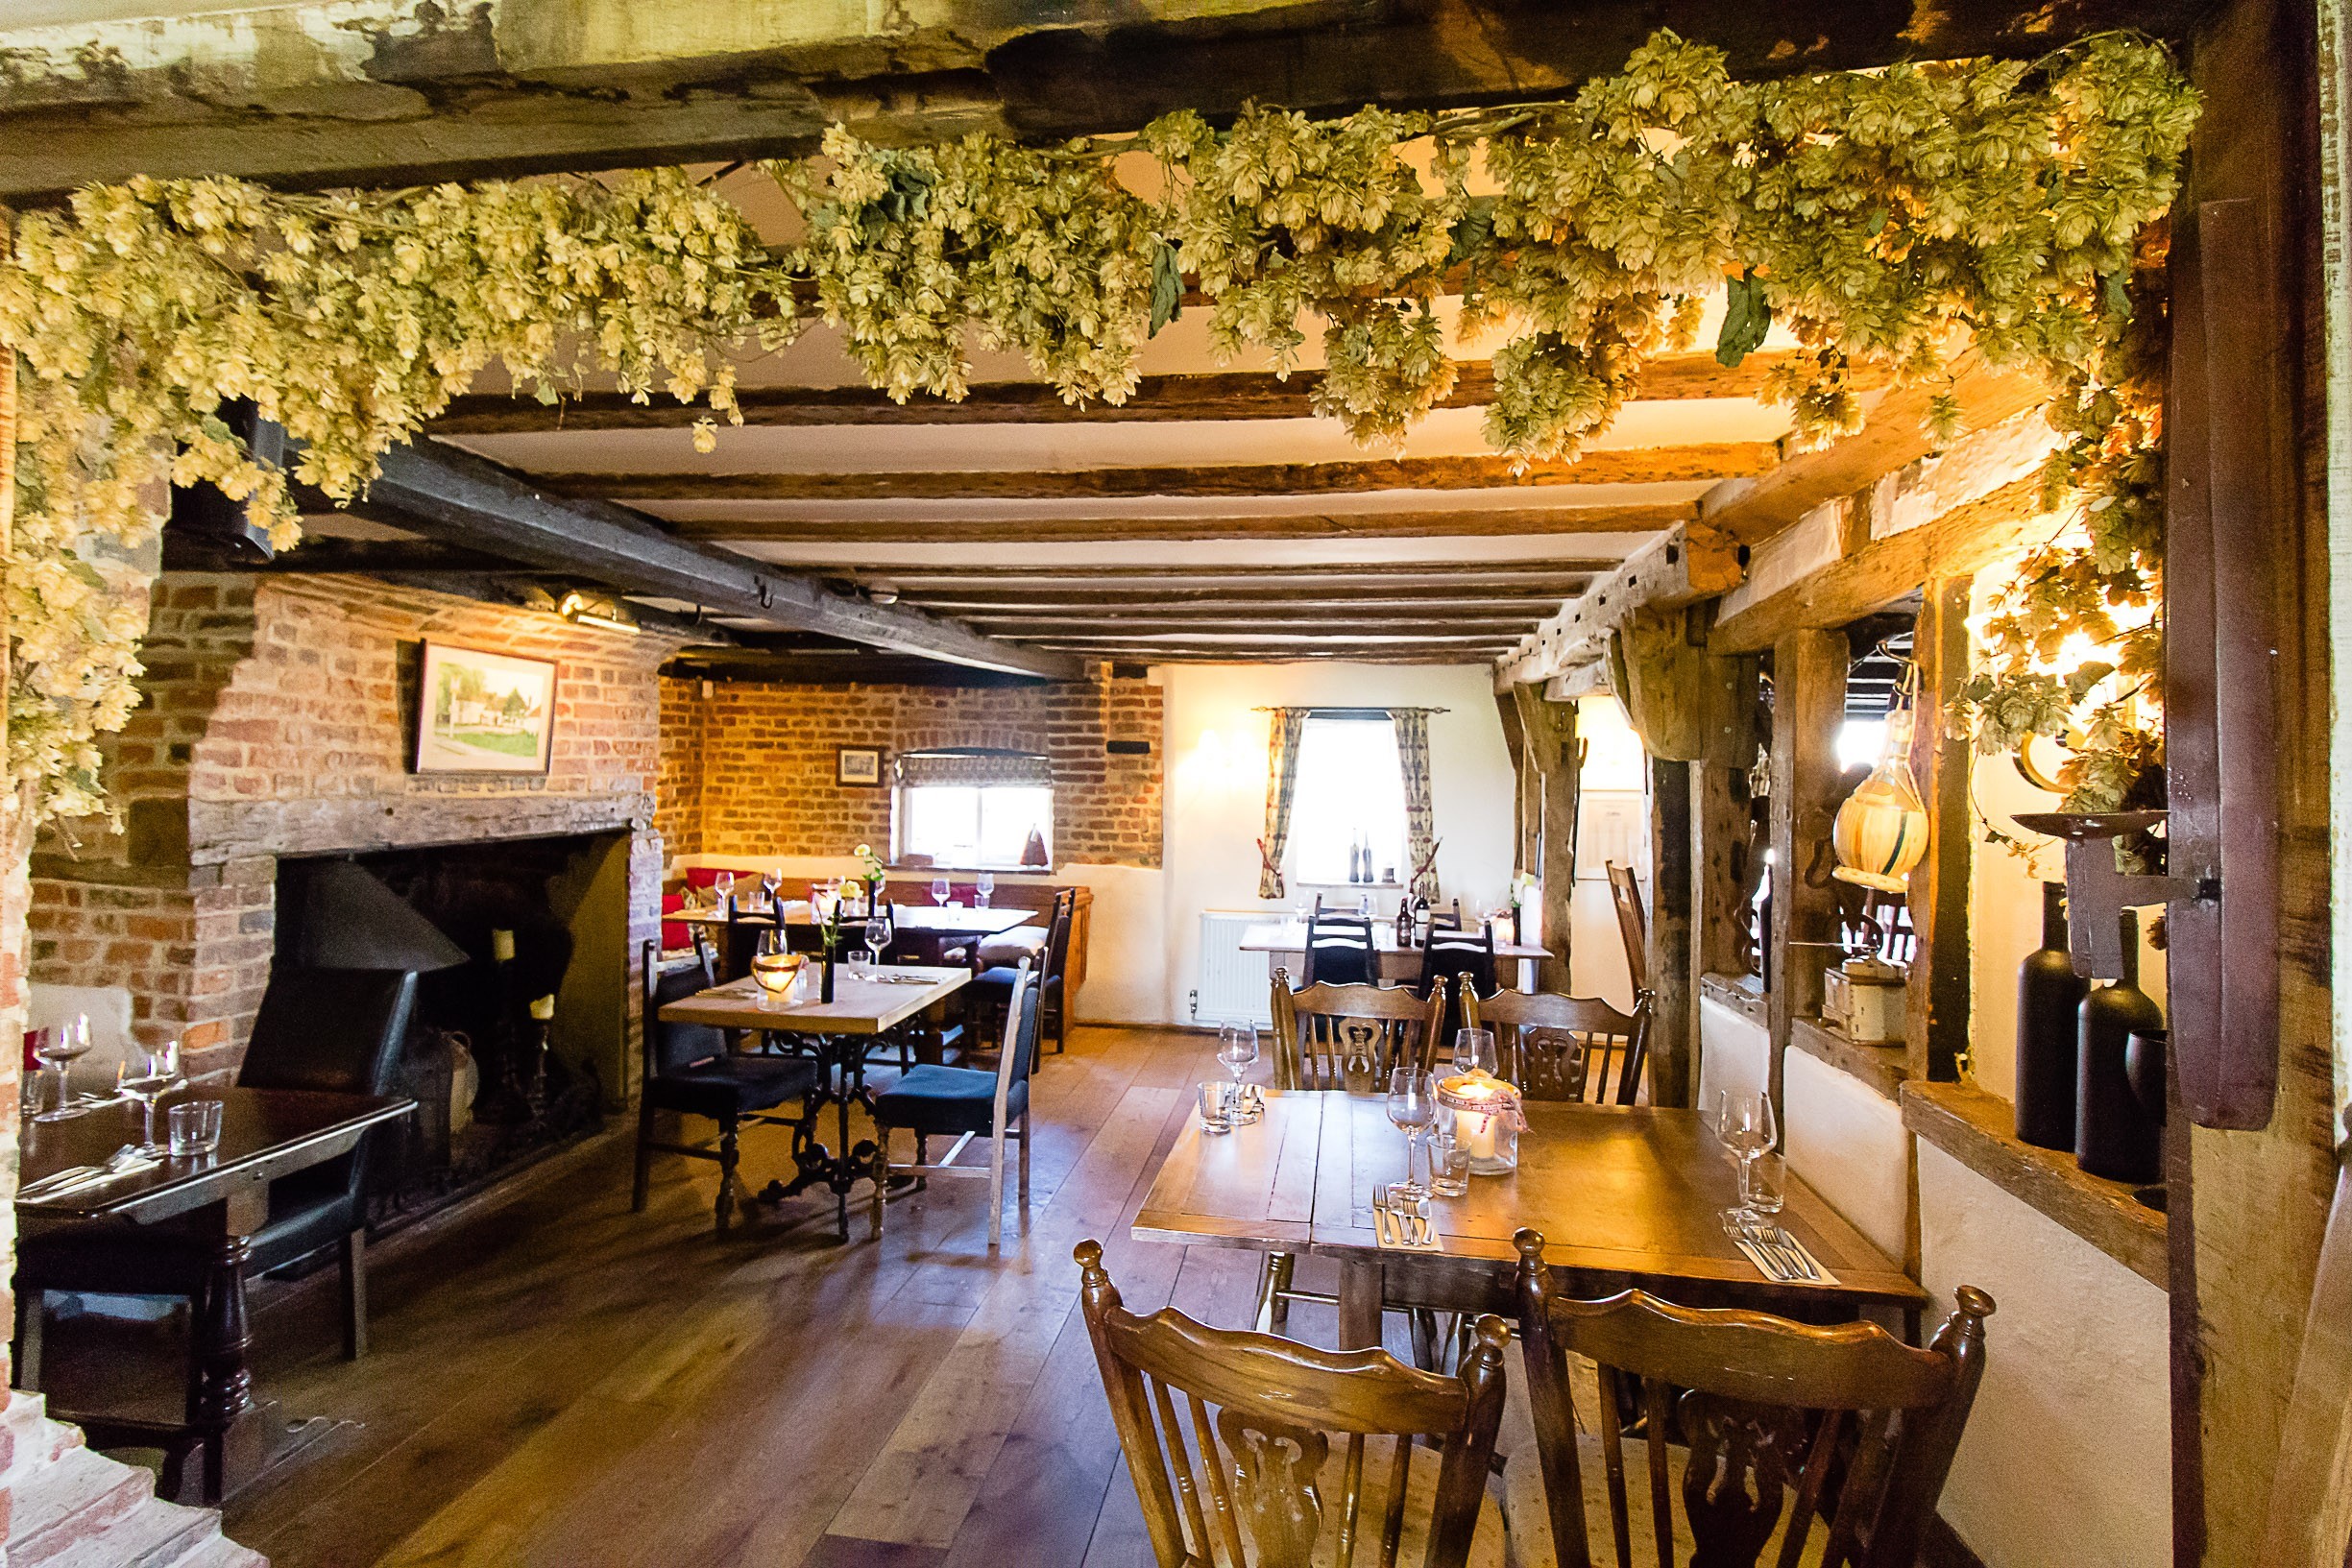 Function Space Room at Farriers Arms